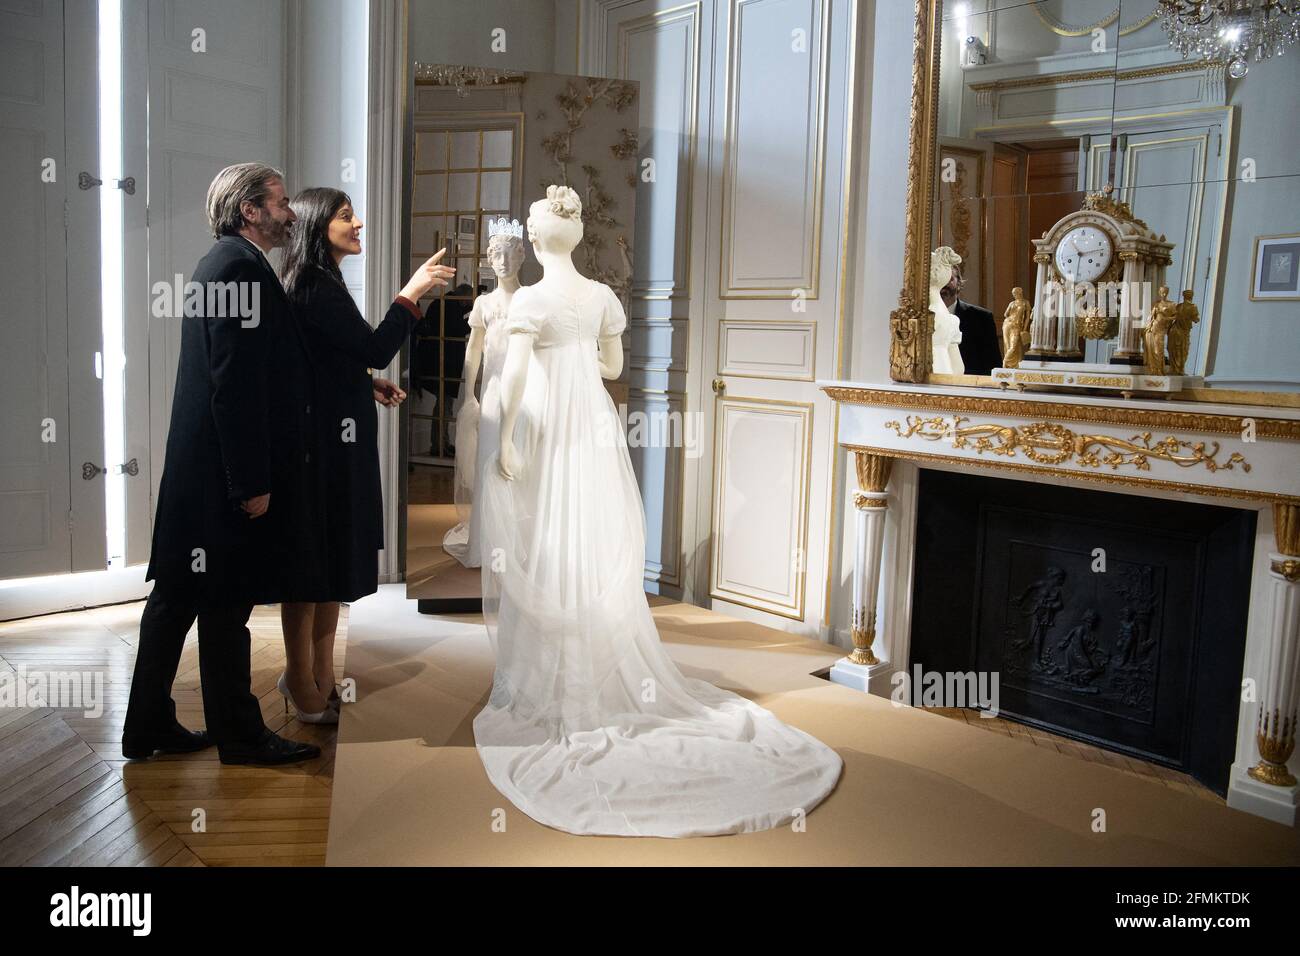 Prince Joachim Murat and his wife princess Yasmine visit the exhibition  JOSEPHINE NAPOLEON une histoire (EXTRA)ORDINAIRE at Chaumet Paris, on May  5, 2021 in Paris, France.The exhibition from May 8 to July